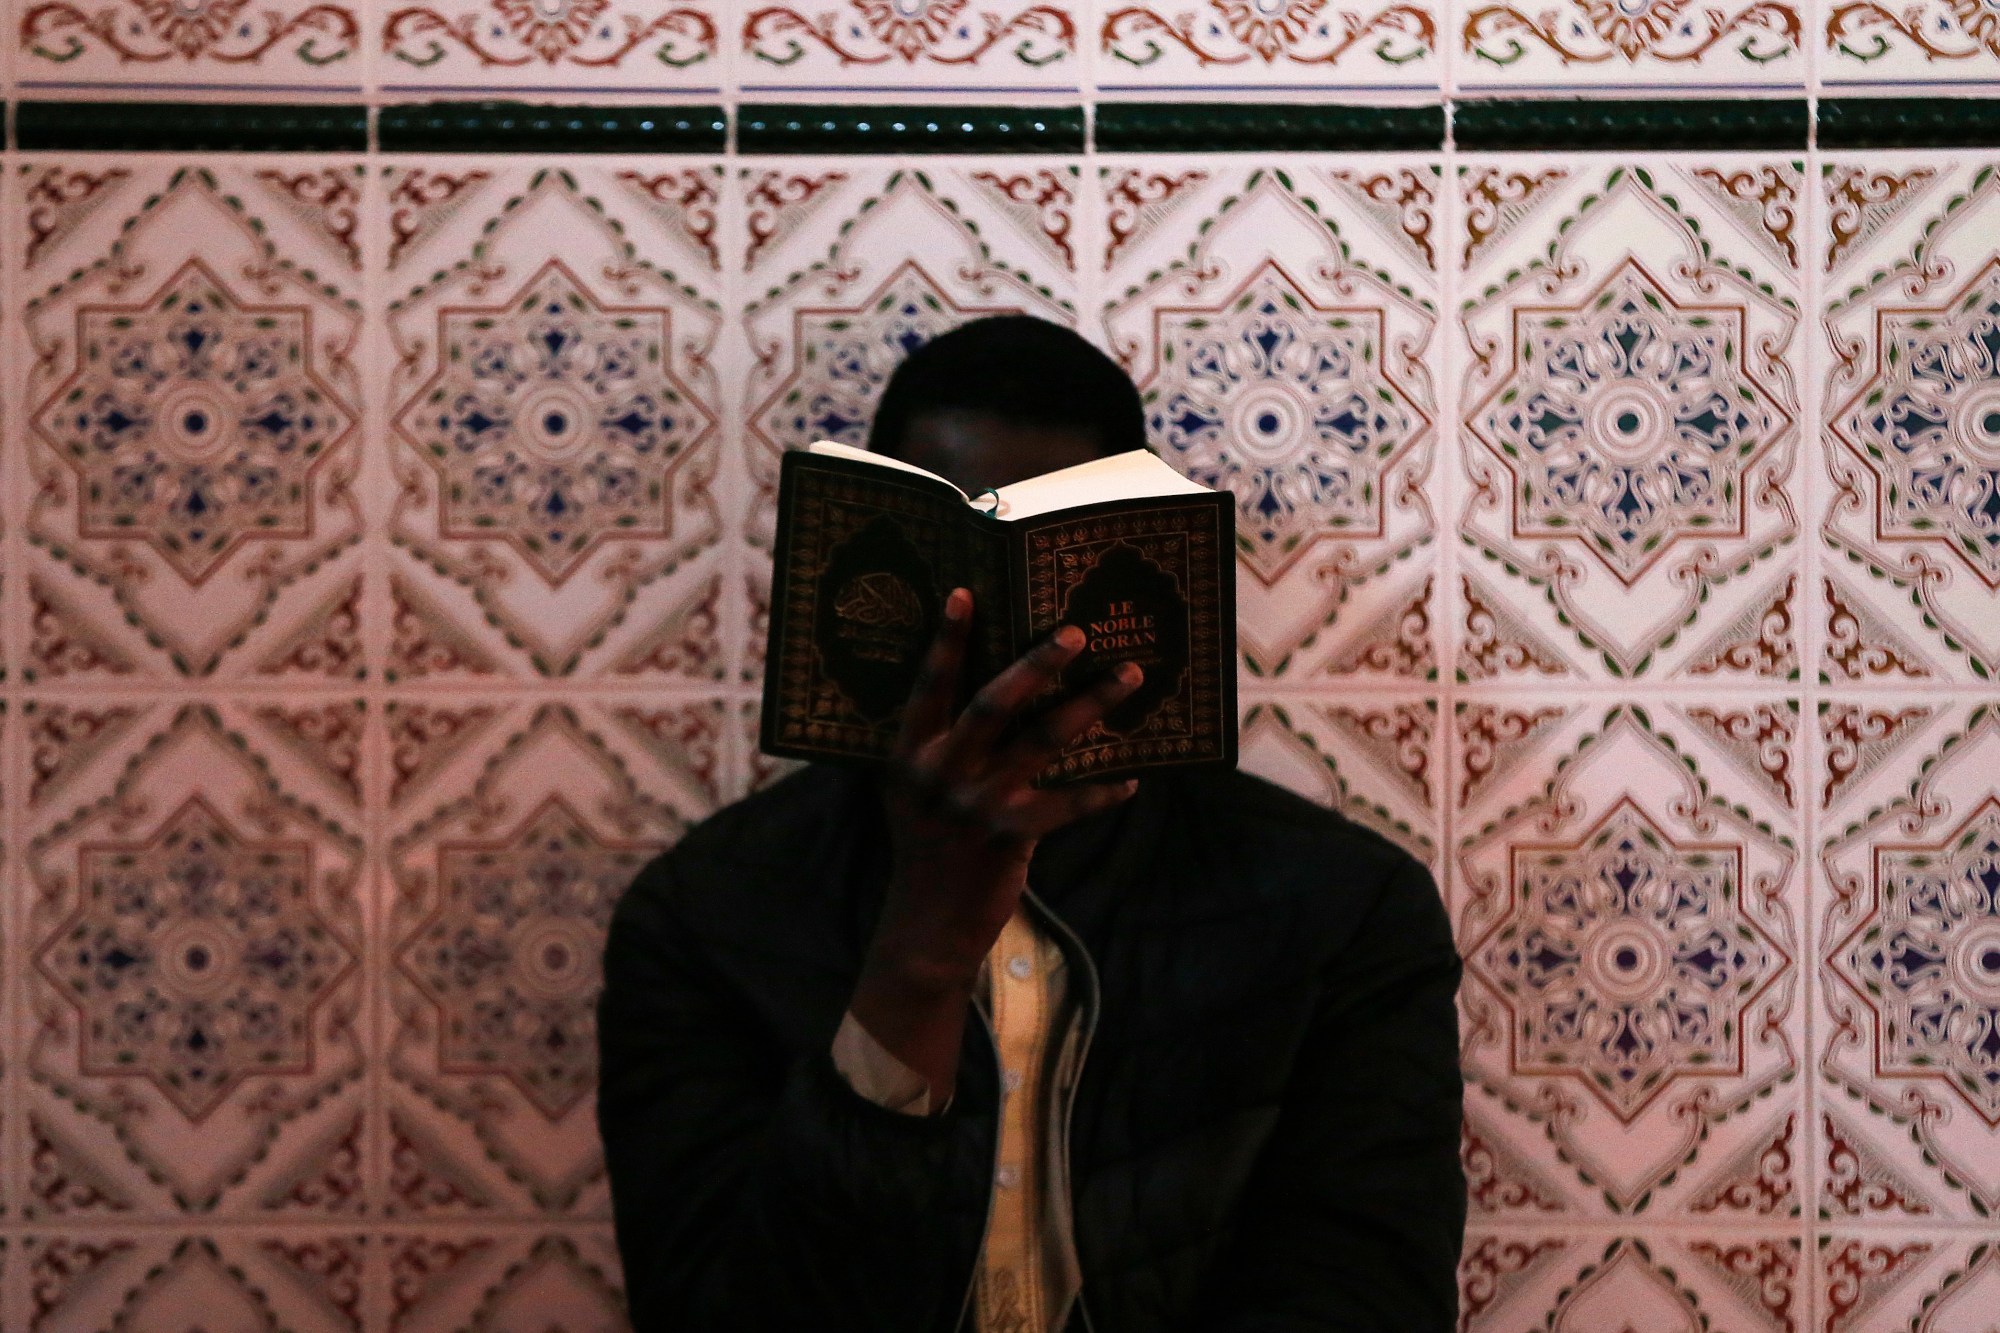 A Muslim man reads the Quran at the Ennour Mosque in the northwestern French city of Le Havre on 18 May 2018 during the Muslim holy month of Ramadan (AFP)